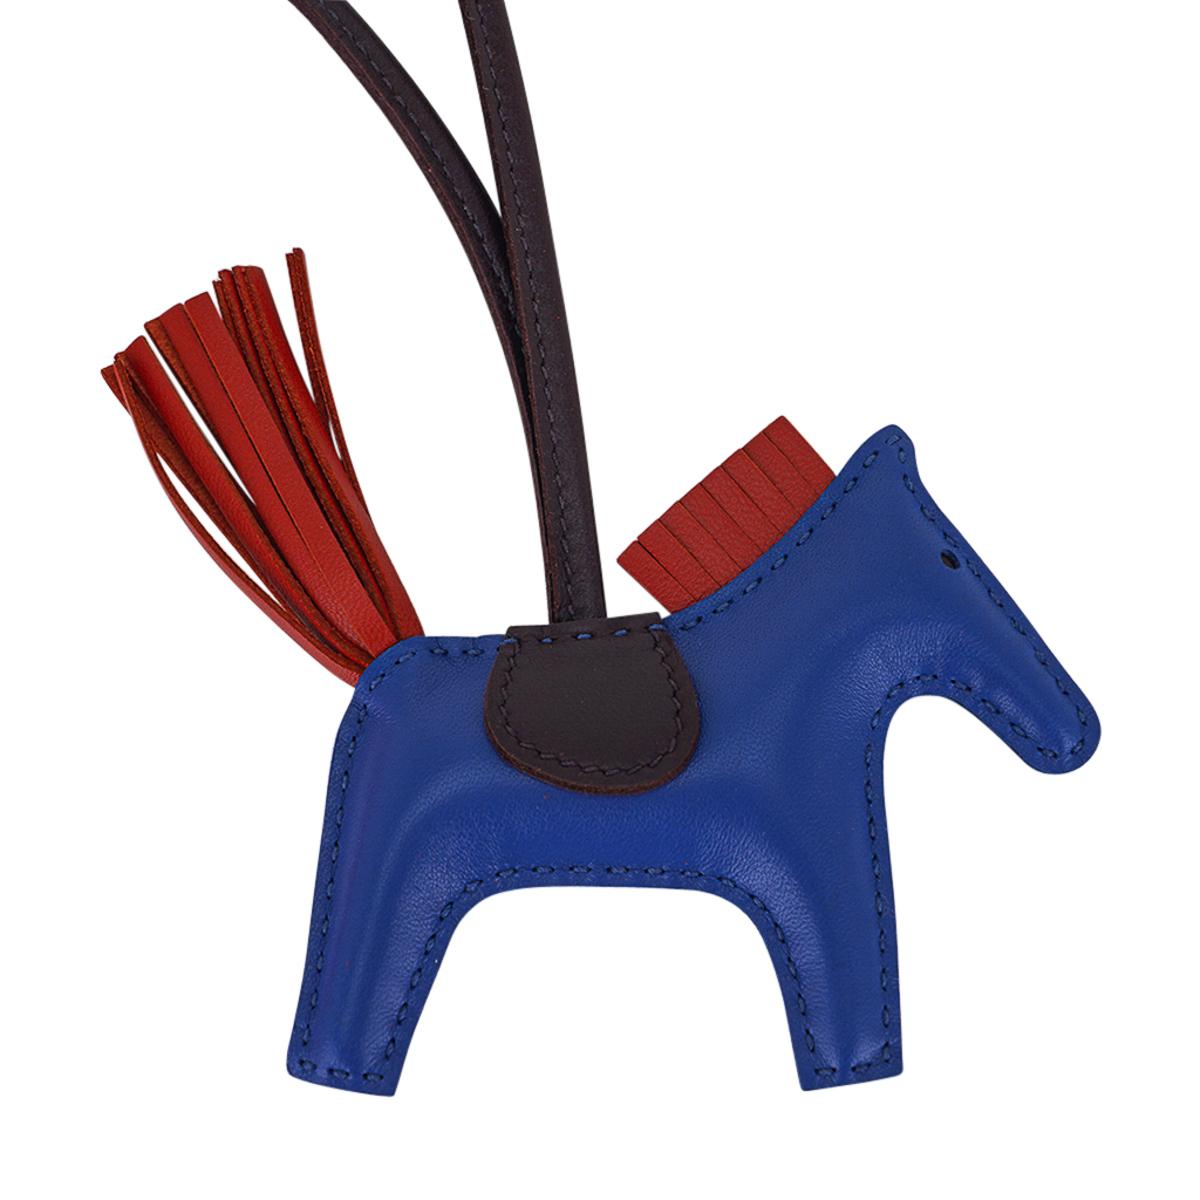 Mightychic offers an Hermes Grigri Pegase Rodeo PM featured in Bleu de France, Cornaline and Rouge Sellier.
Charming and playful she easily adorns a myriad bag colours in your fabulous collection. 
Leather is lambskin Milo.
Signature HERMES PARIS